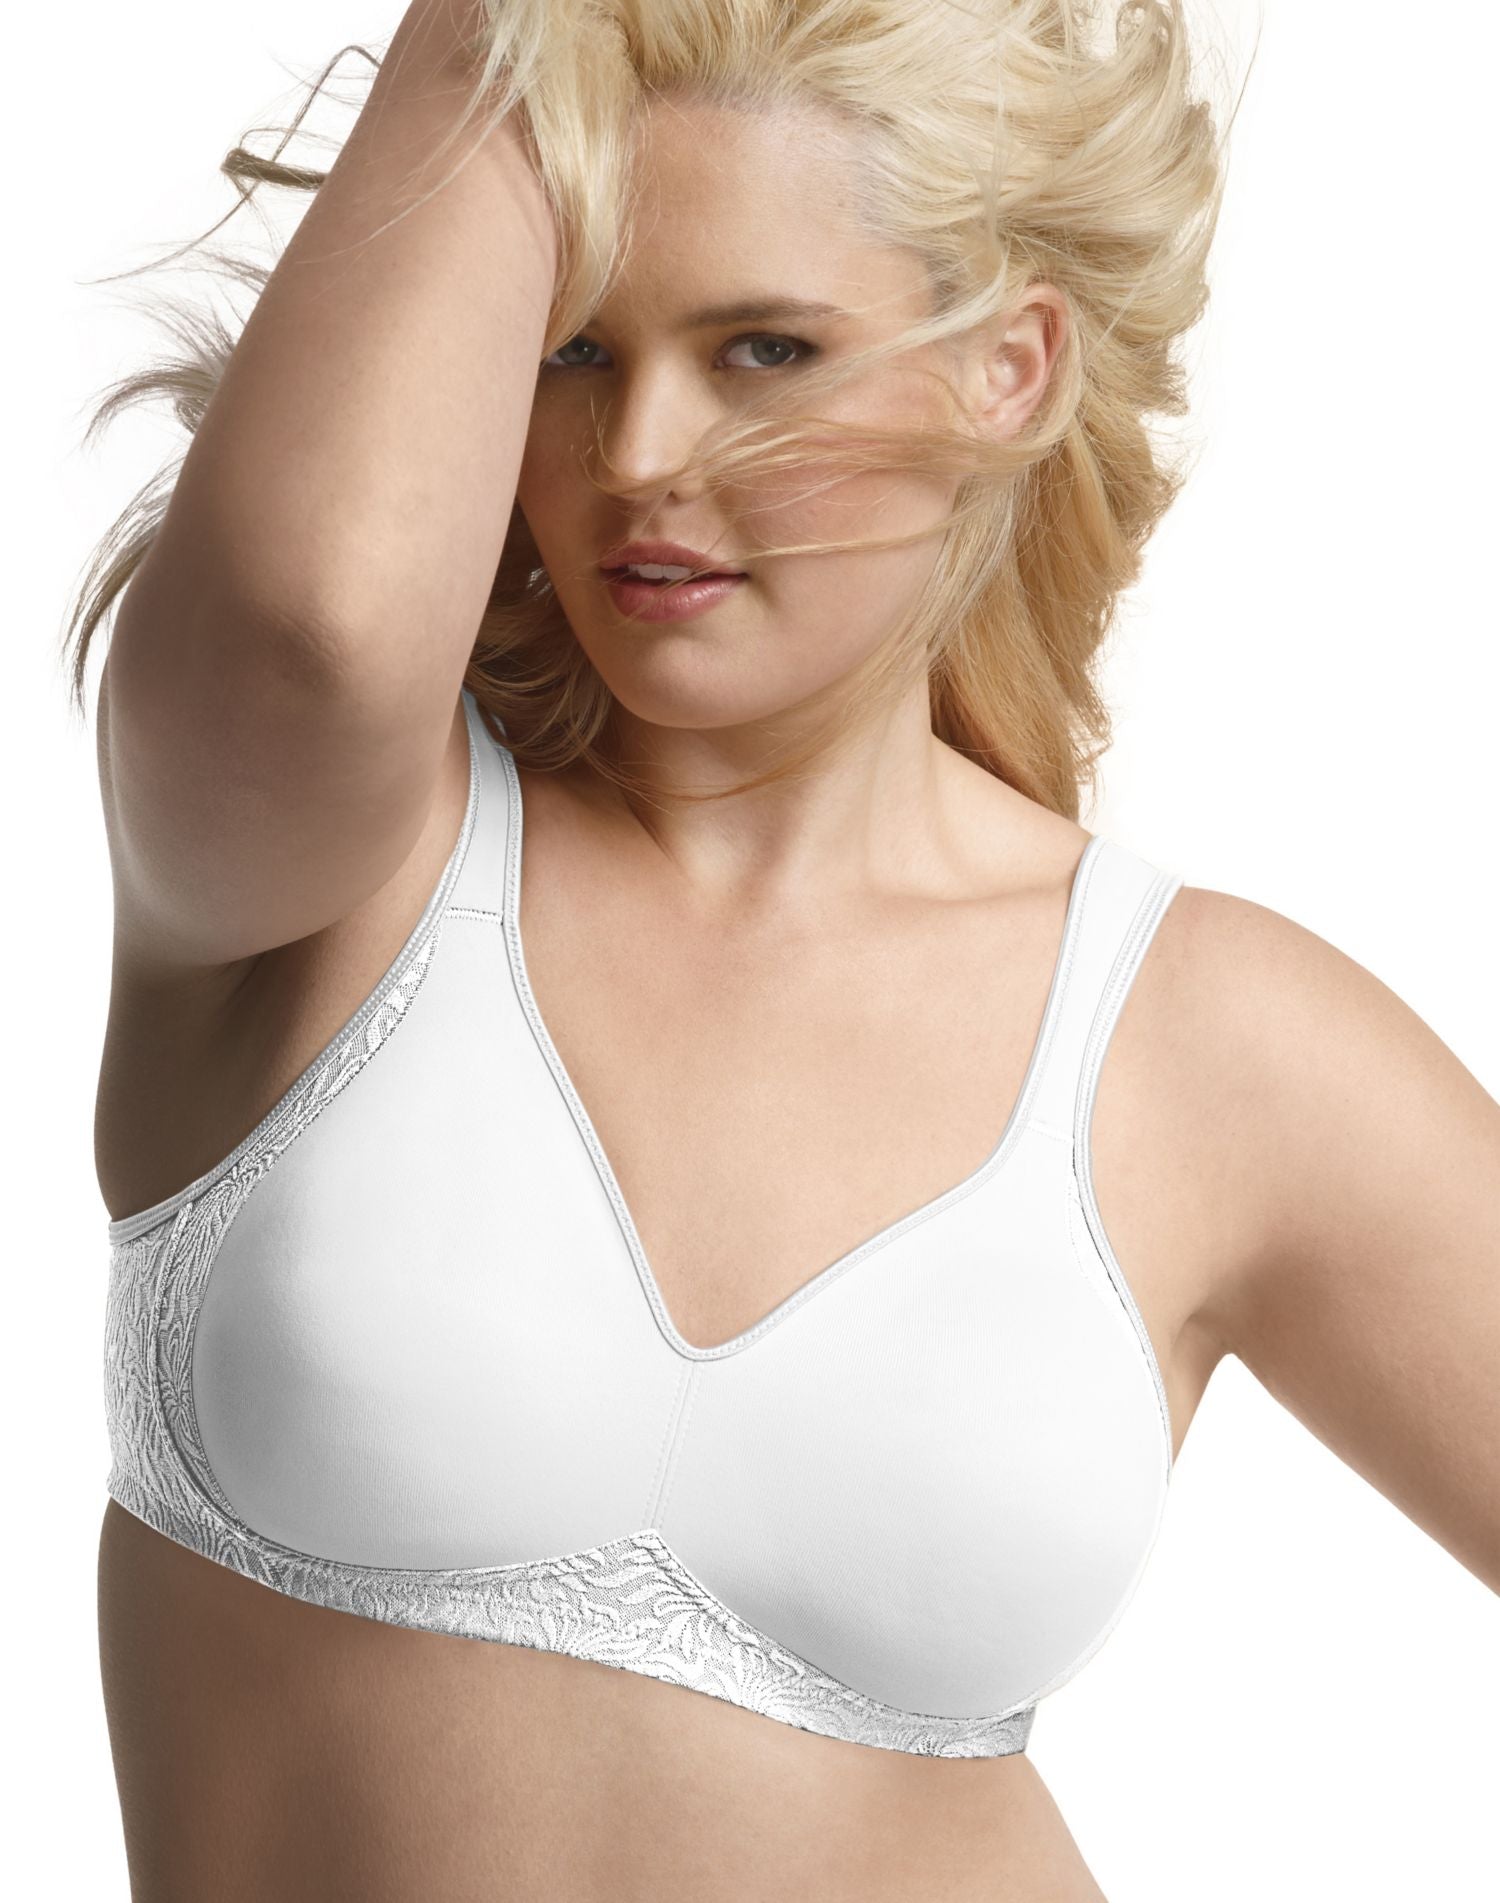 Nude 18 Hour Seamless Smoothing Wirefree Bra - Size 36D